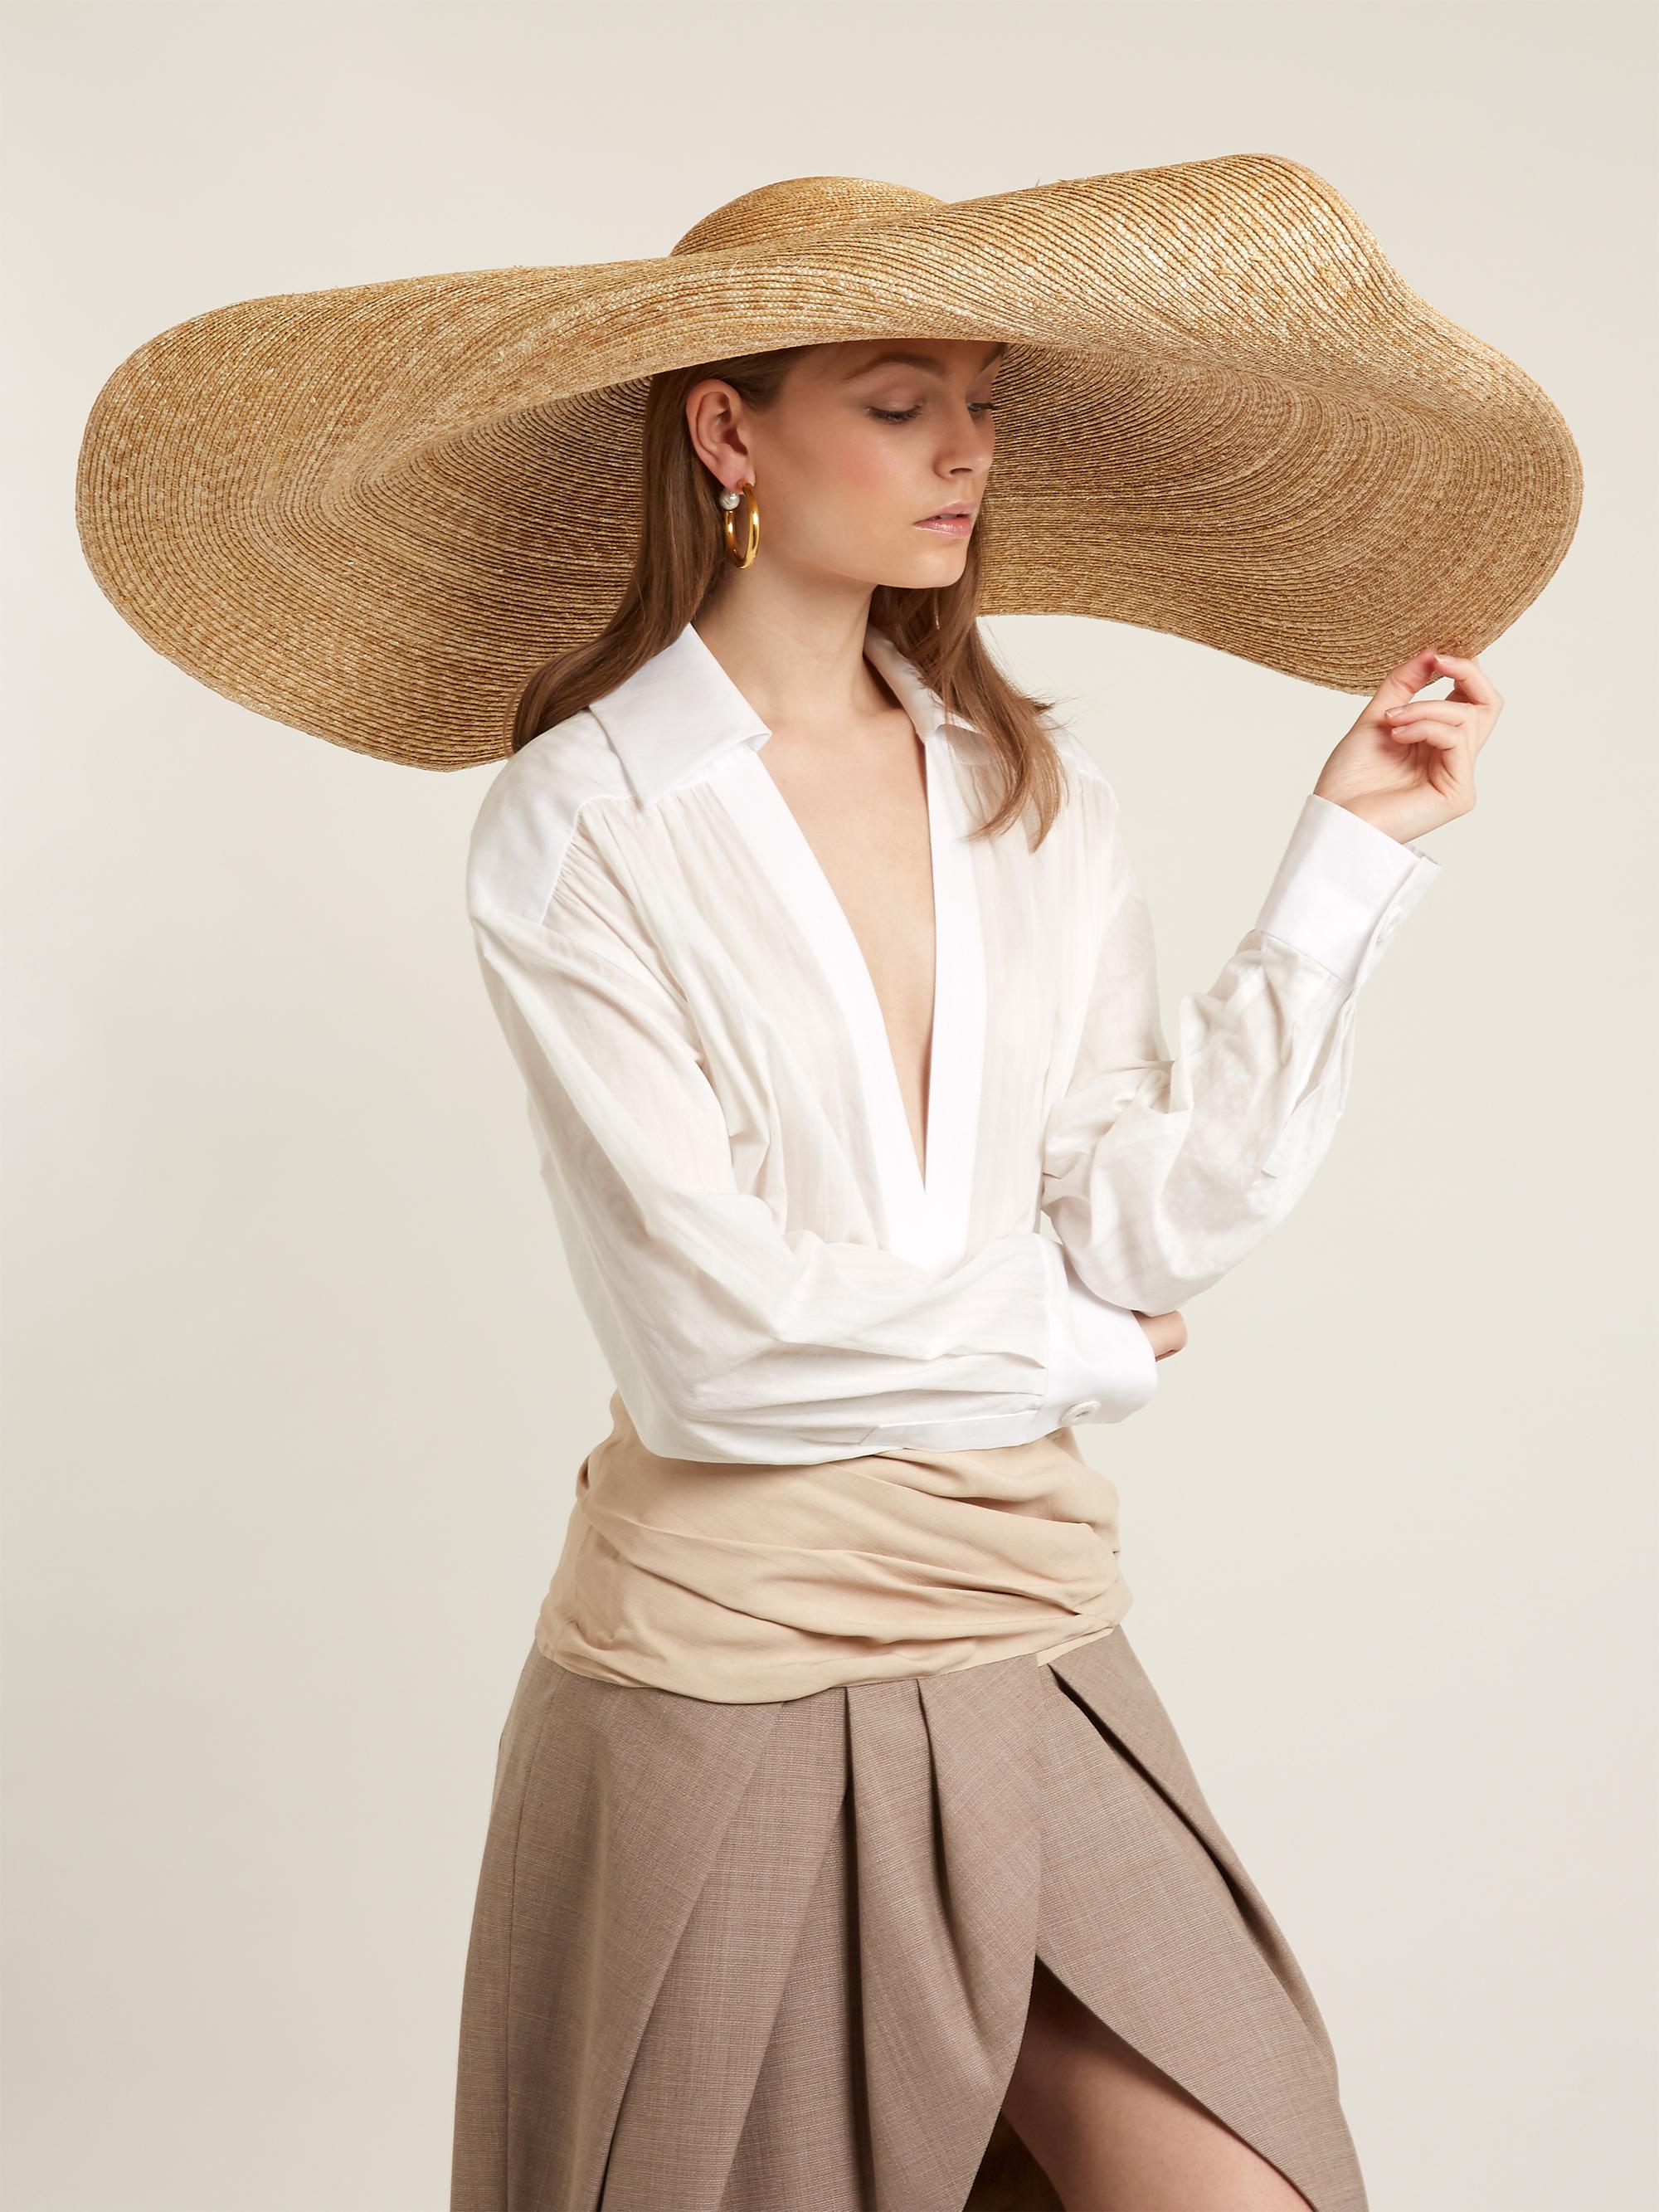 Jacquemus La Bomba Straw Hat in Natural | Lyst